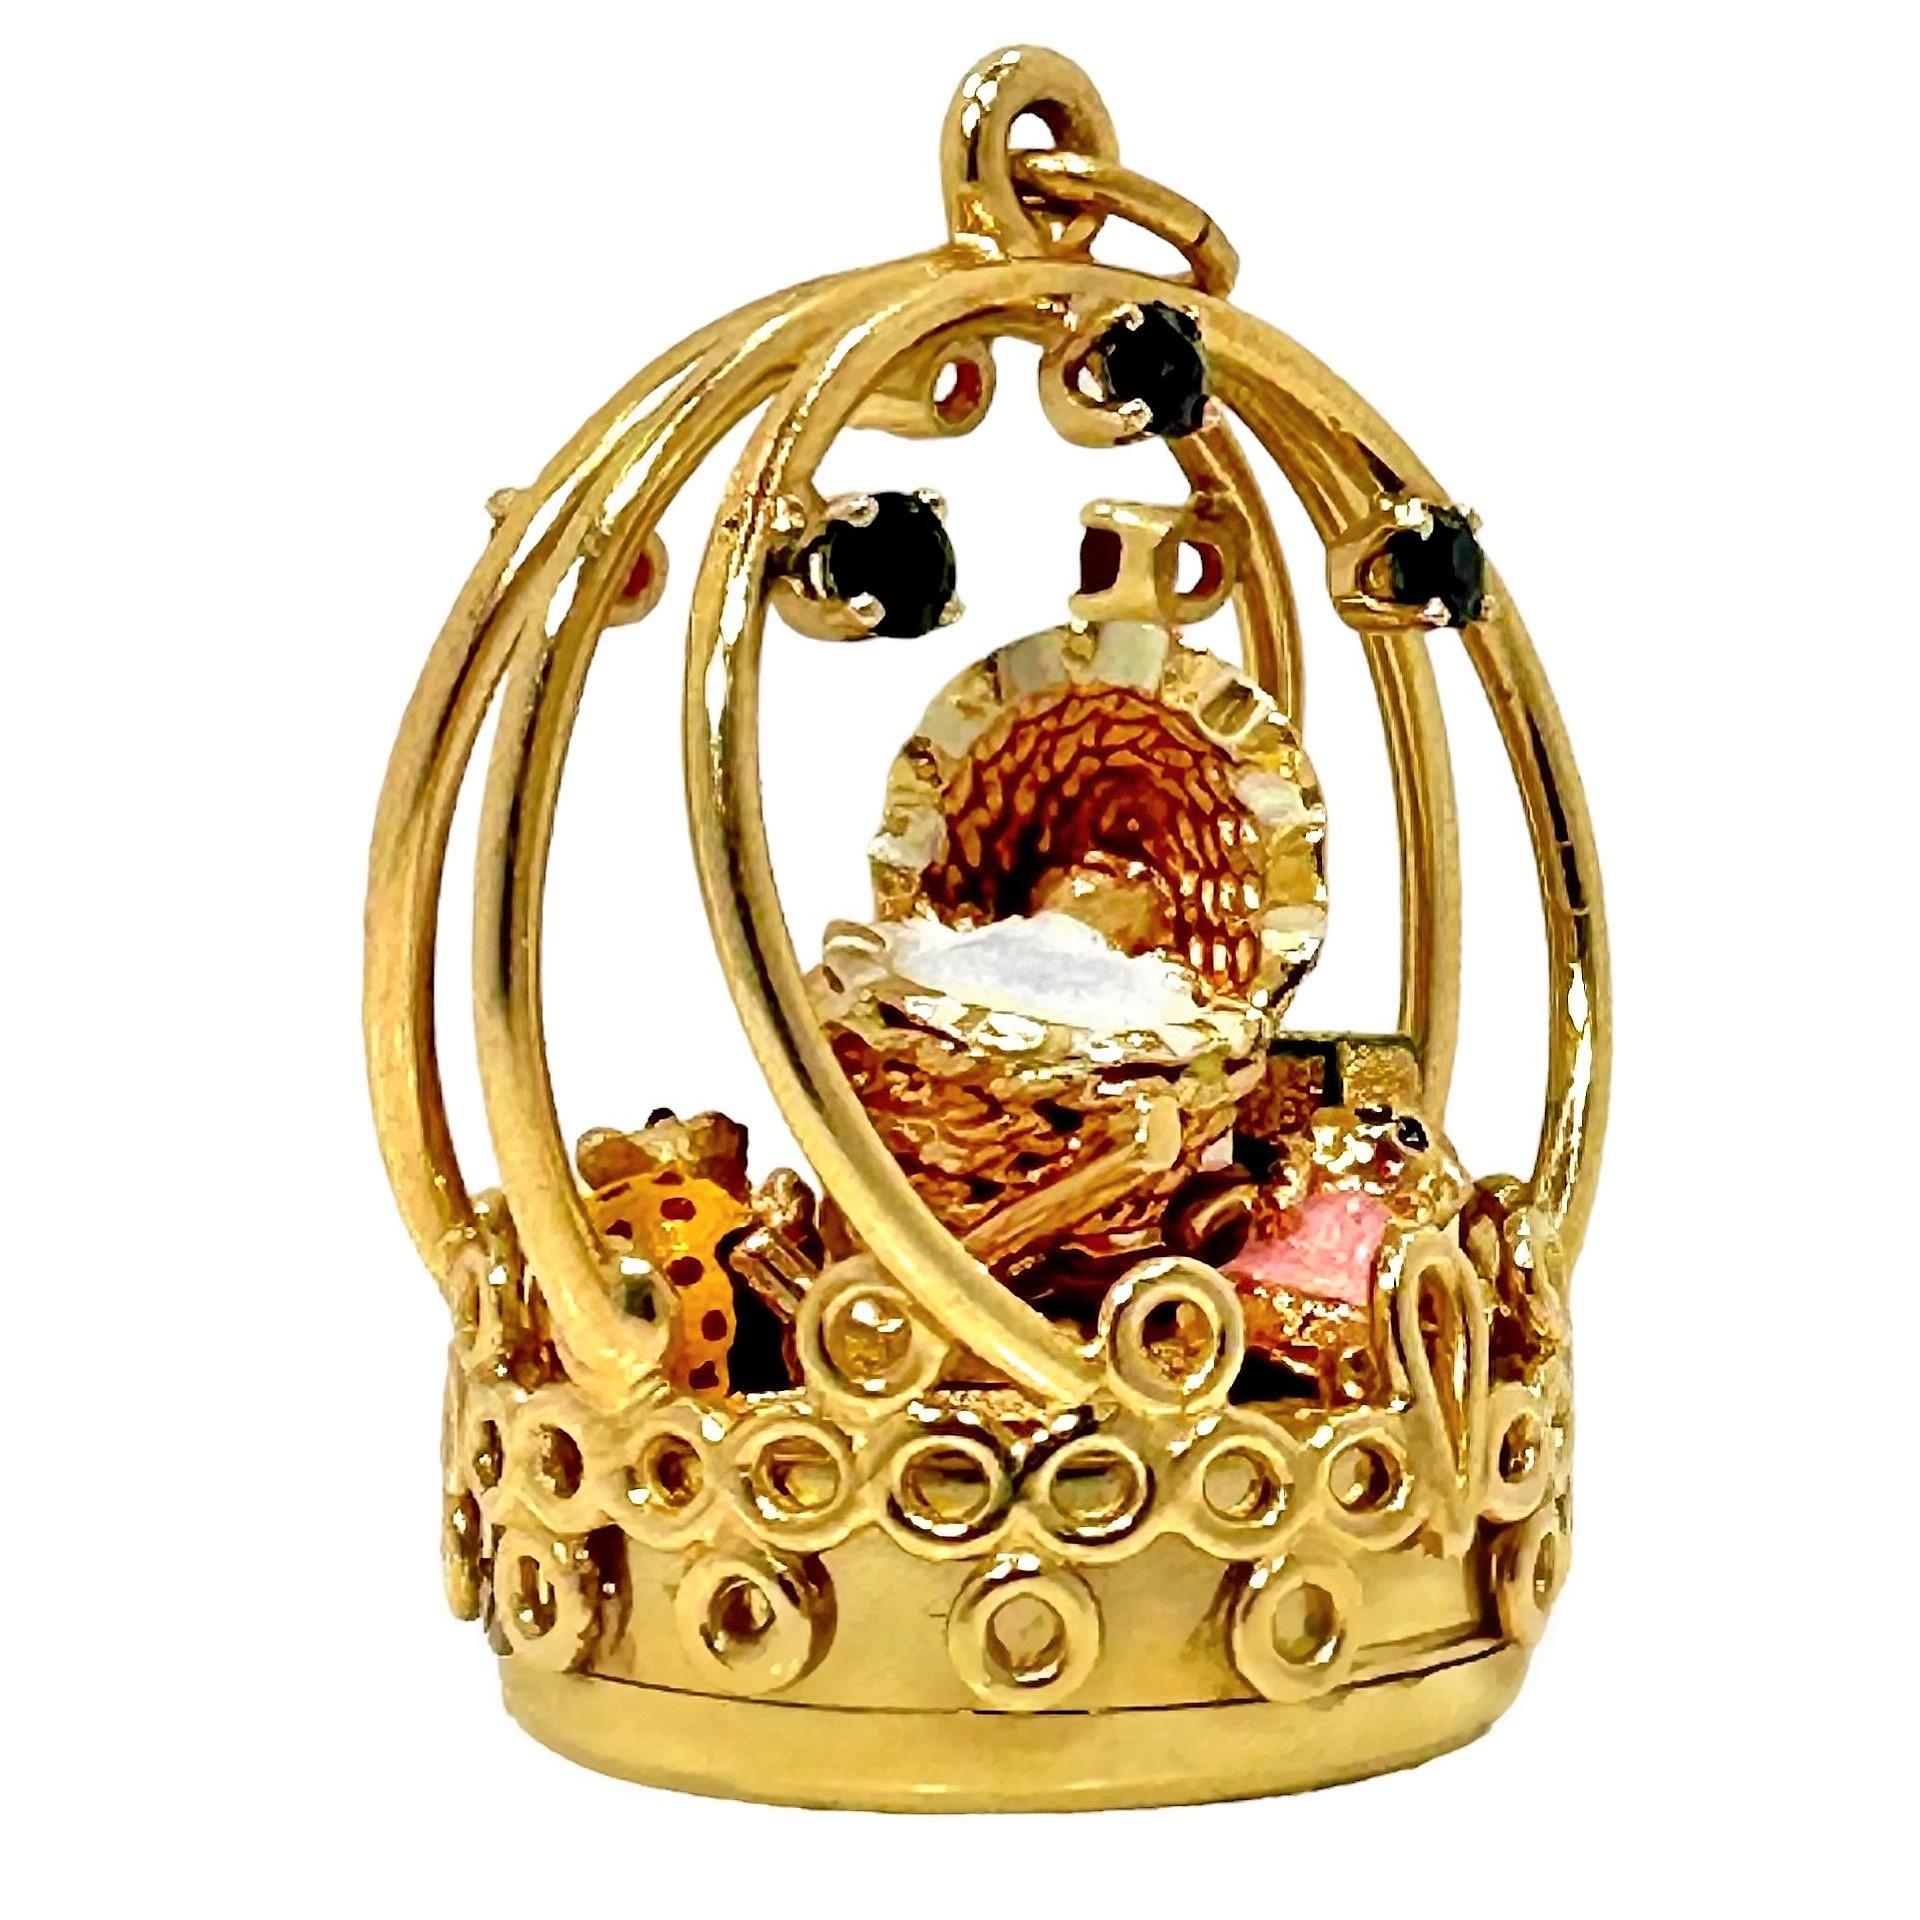 This imaginative and whimsical  pendant features a small infant in covered stroller under a golden arch accented with rubies and sapphires. Multicolored hot enamel accents highlight eyes, mouth and blanket as well as the child's teddy bear, building